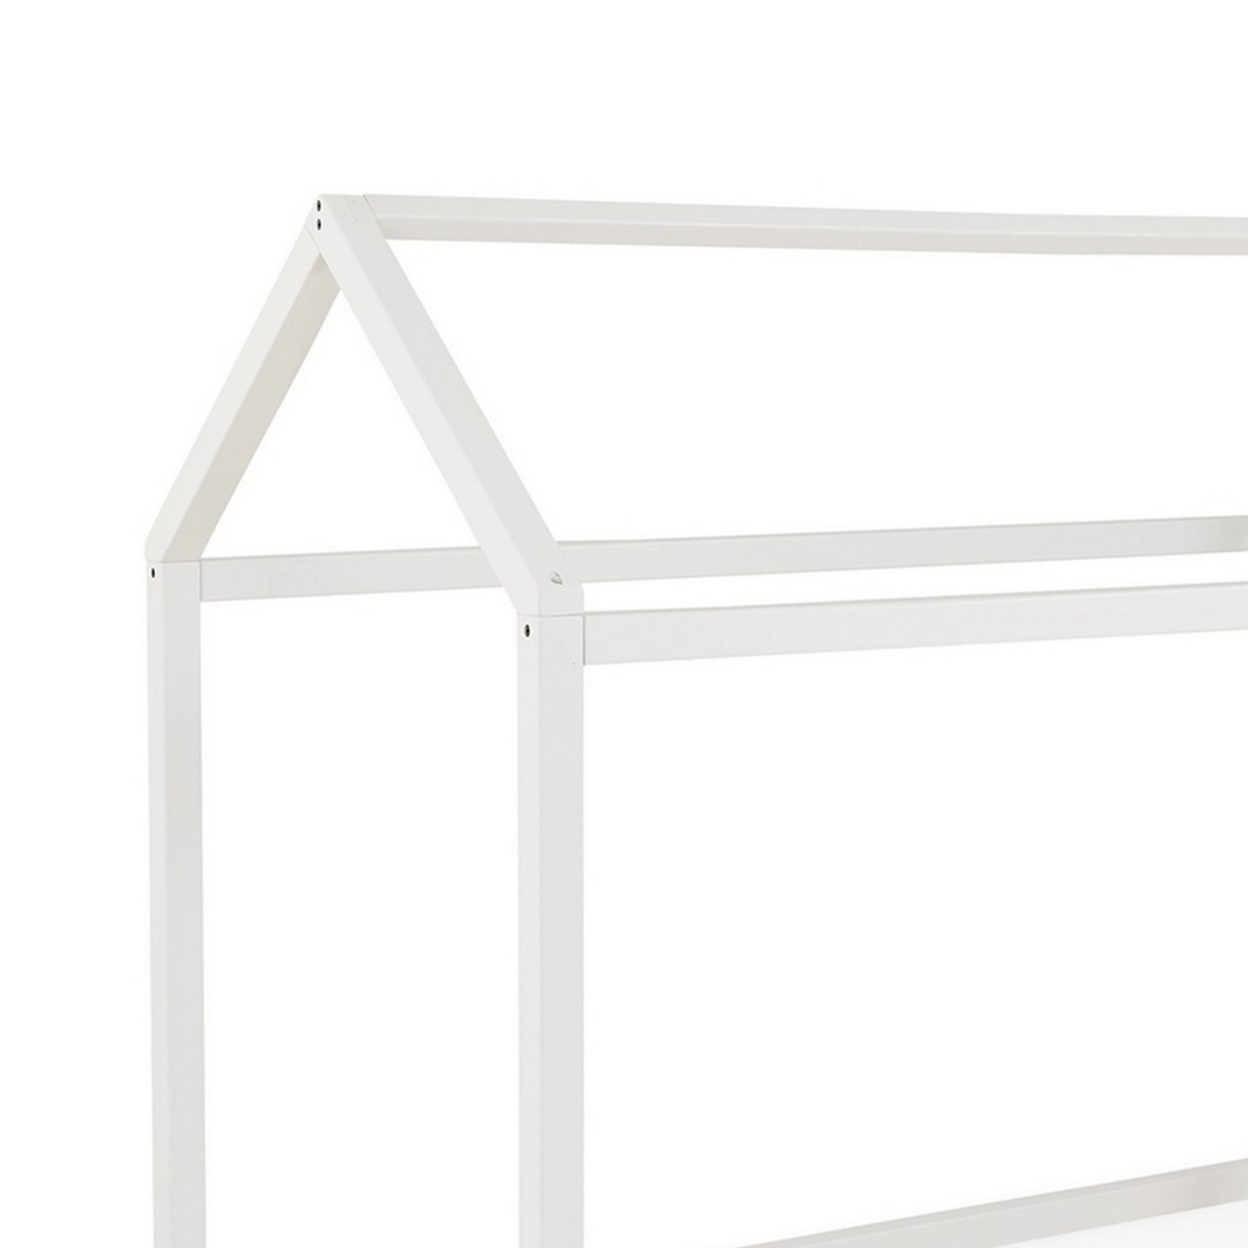 Twin Size Bed Frame With A House Shaped Design, Sleek White Finish